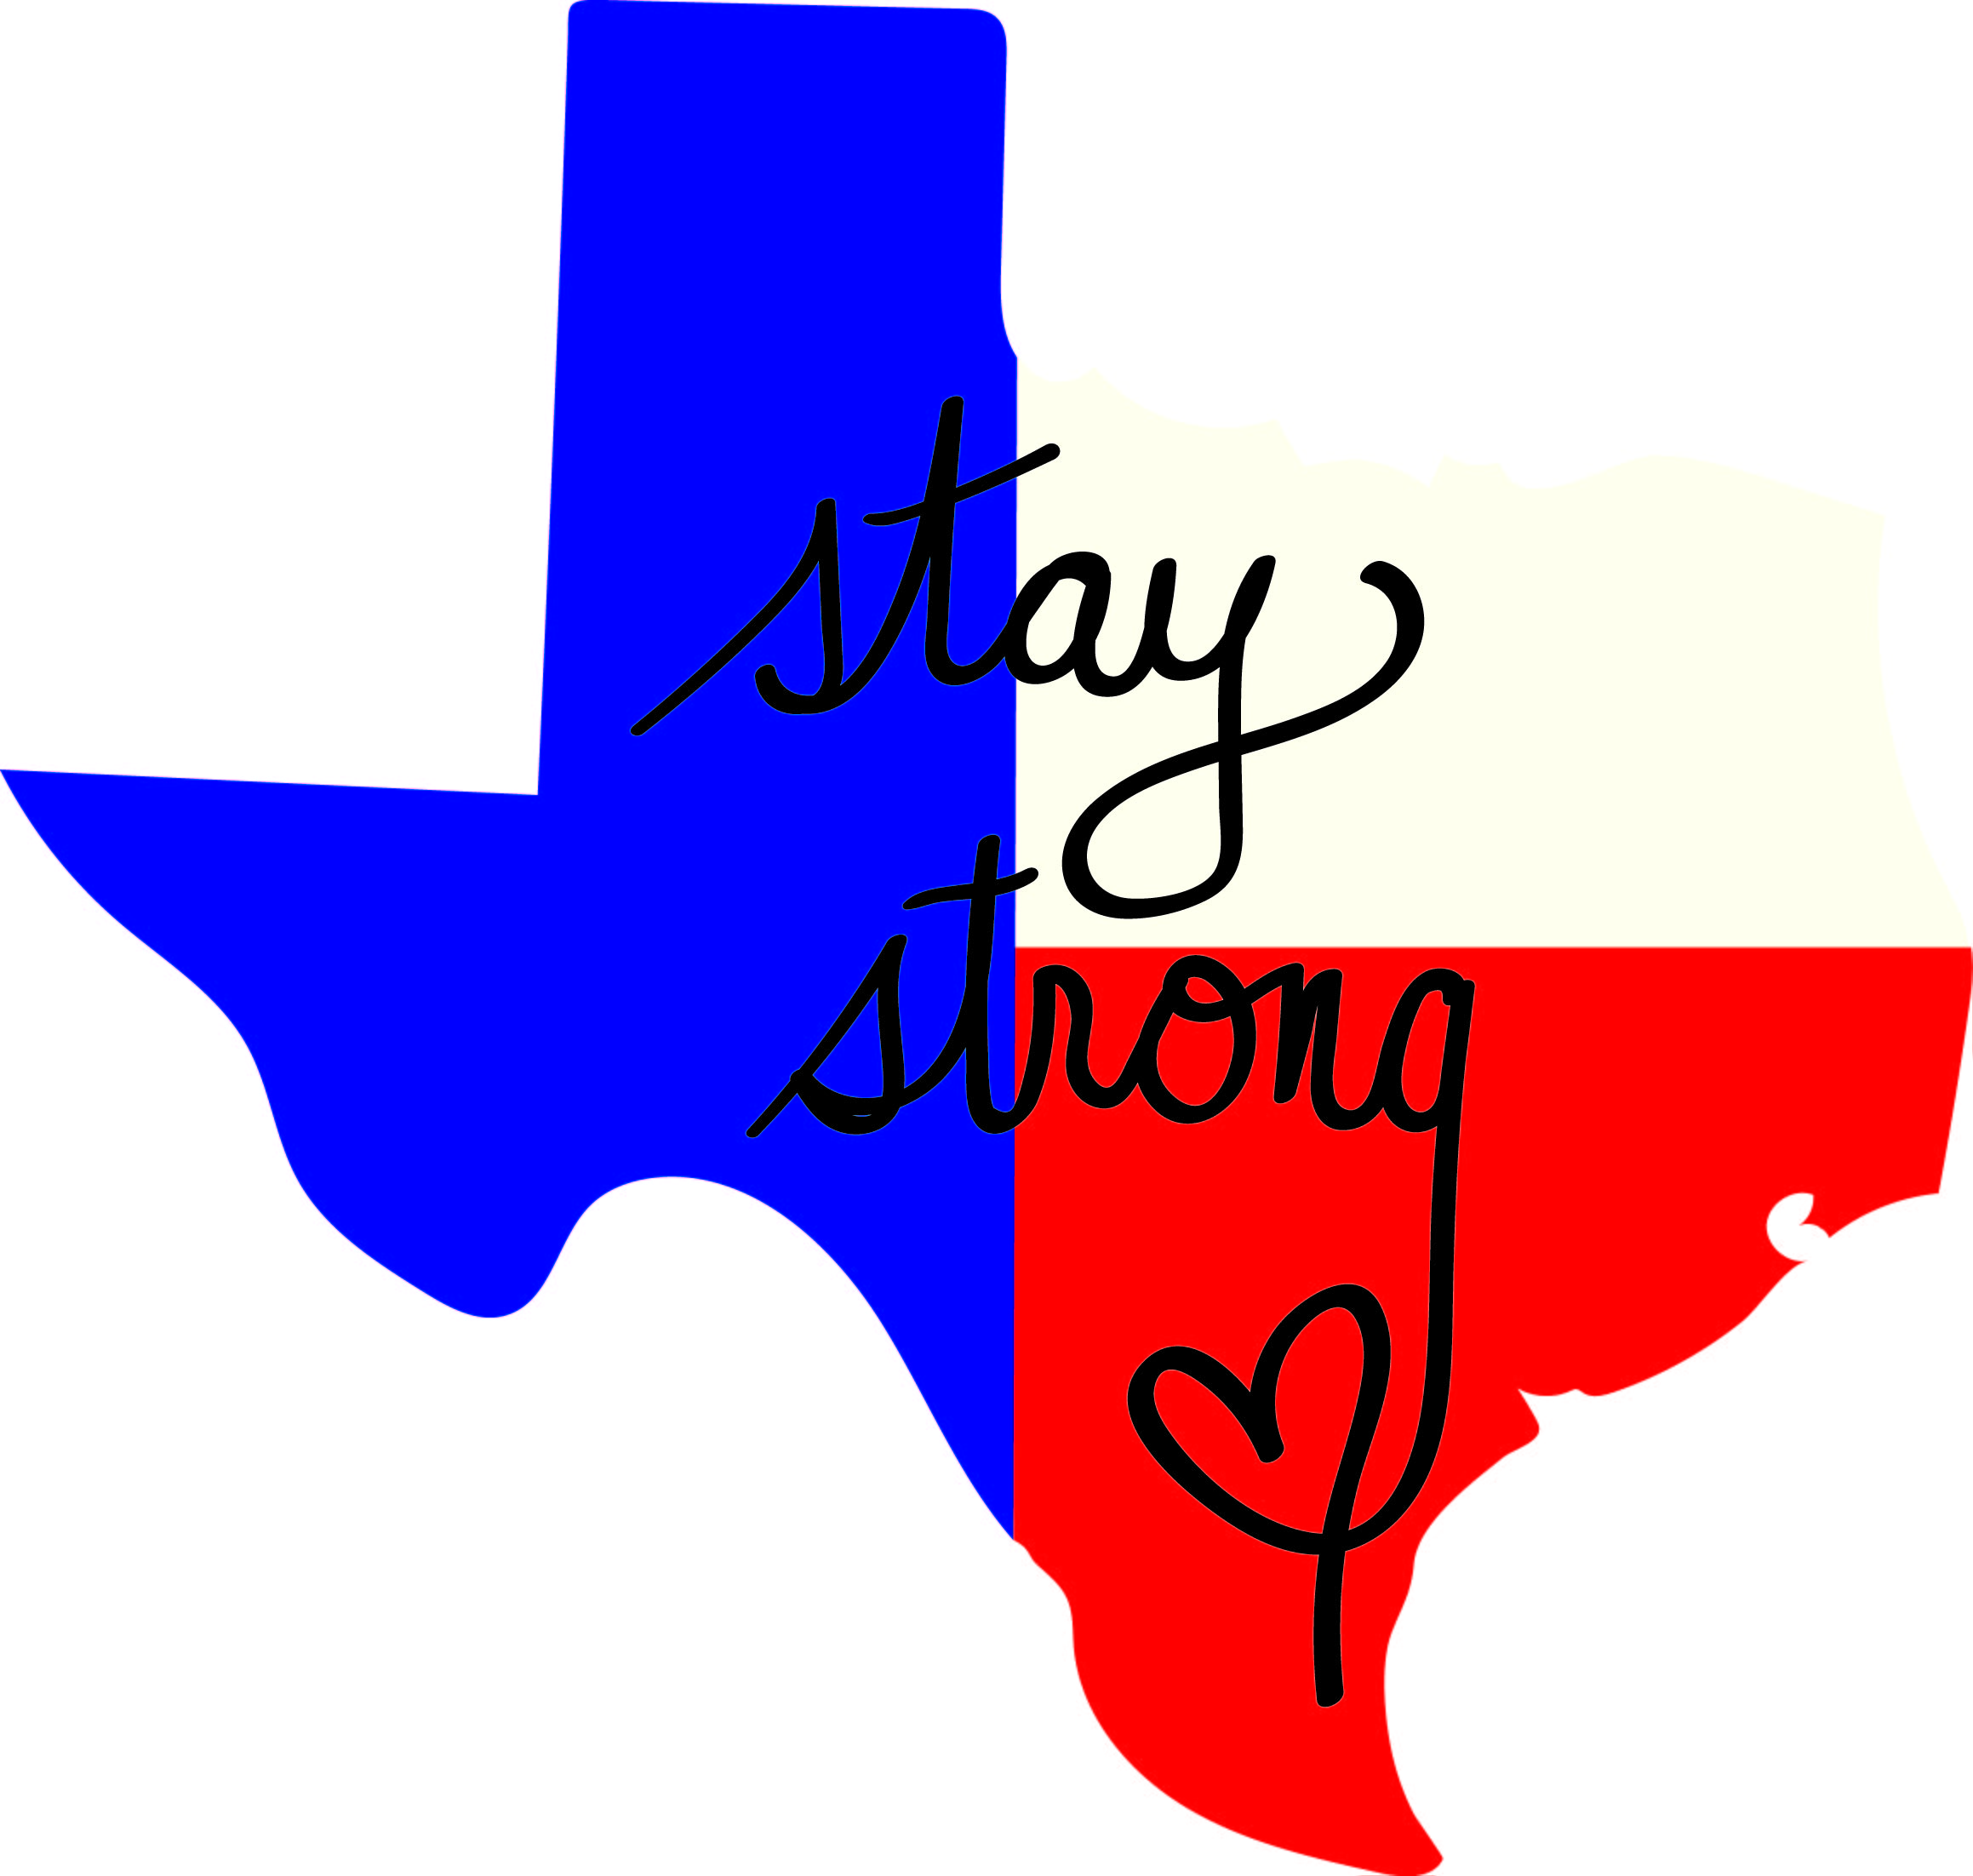 texas stay strong red white blue